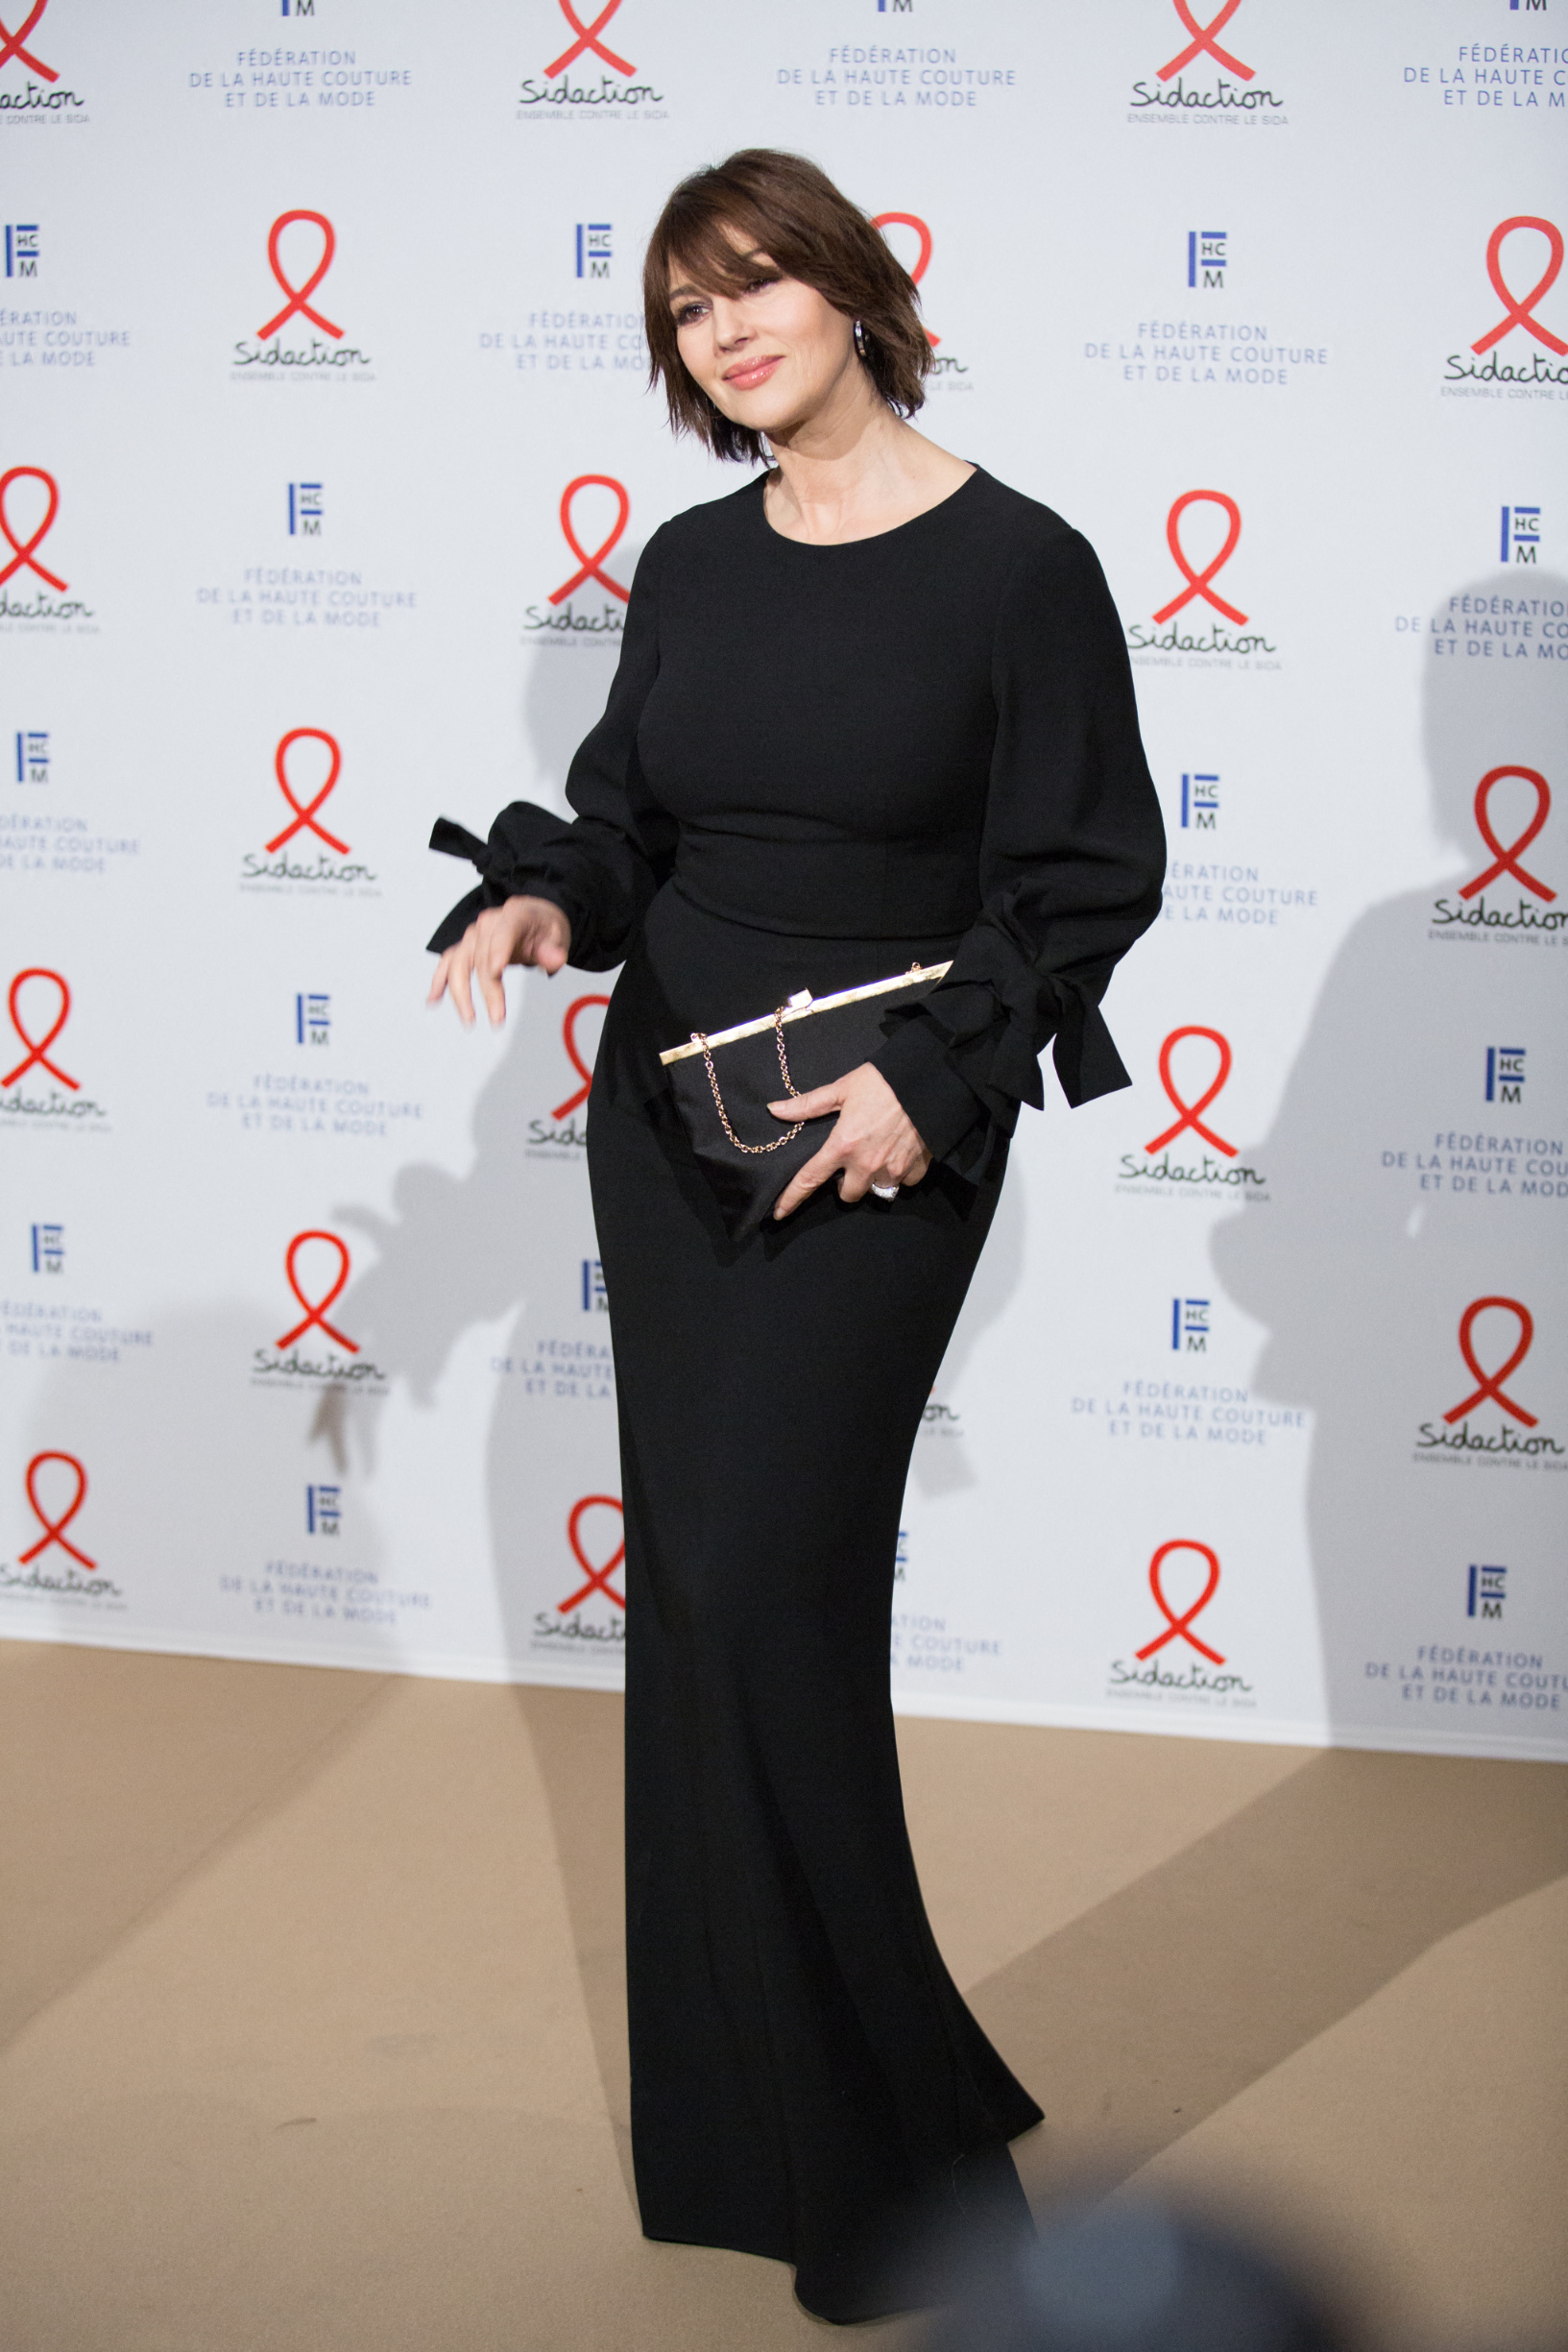 Monica Bellucci attend the 18th Fashion dinner for AIDS Sidaction Association at Pavillon Cambon in Paris on january 23, 2020., Image: 494501338, License: Rights-managed, Restrictions: , Model Release: no, Credit line: Berzane Nasser/ABACA / Abaca Press / Profimedia